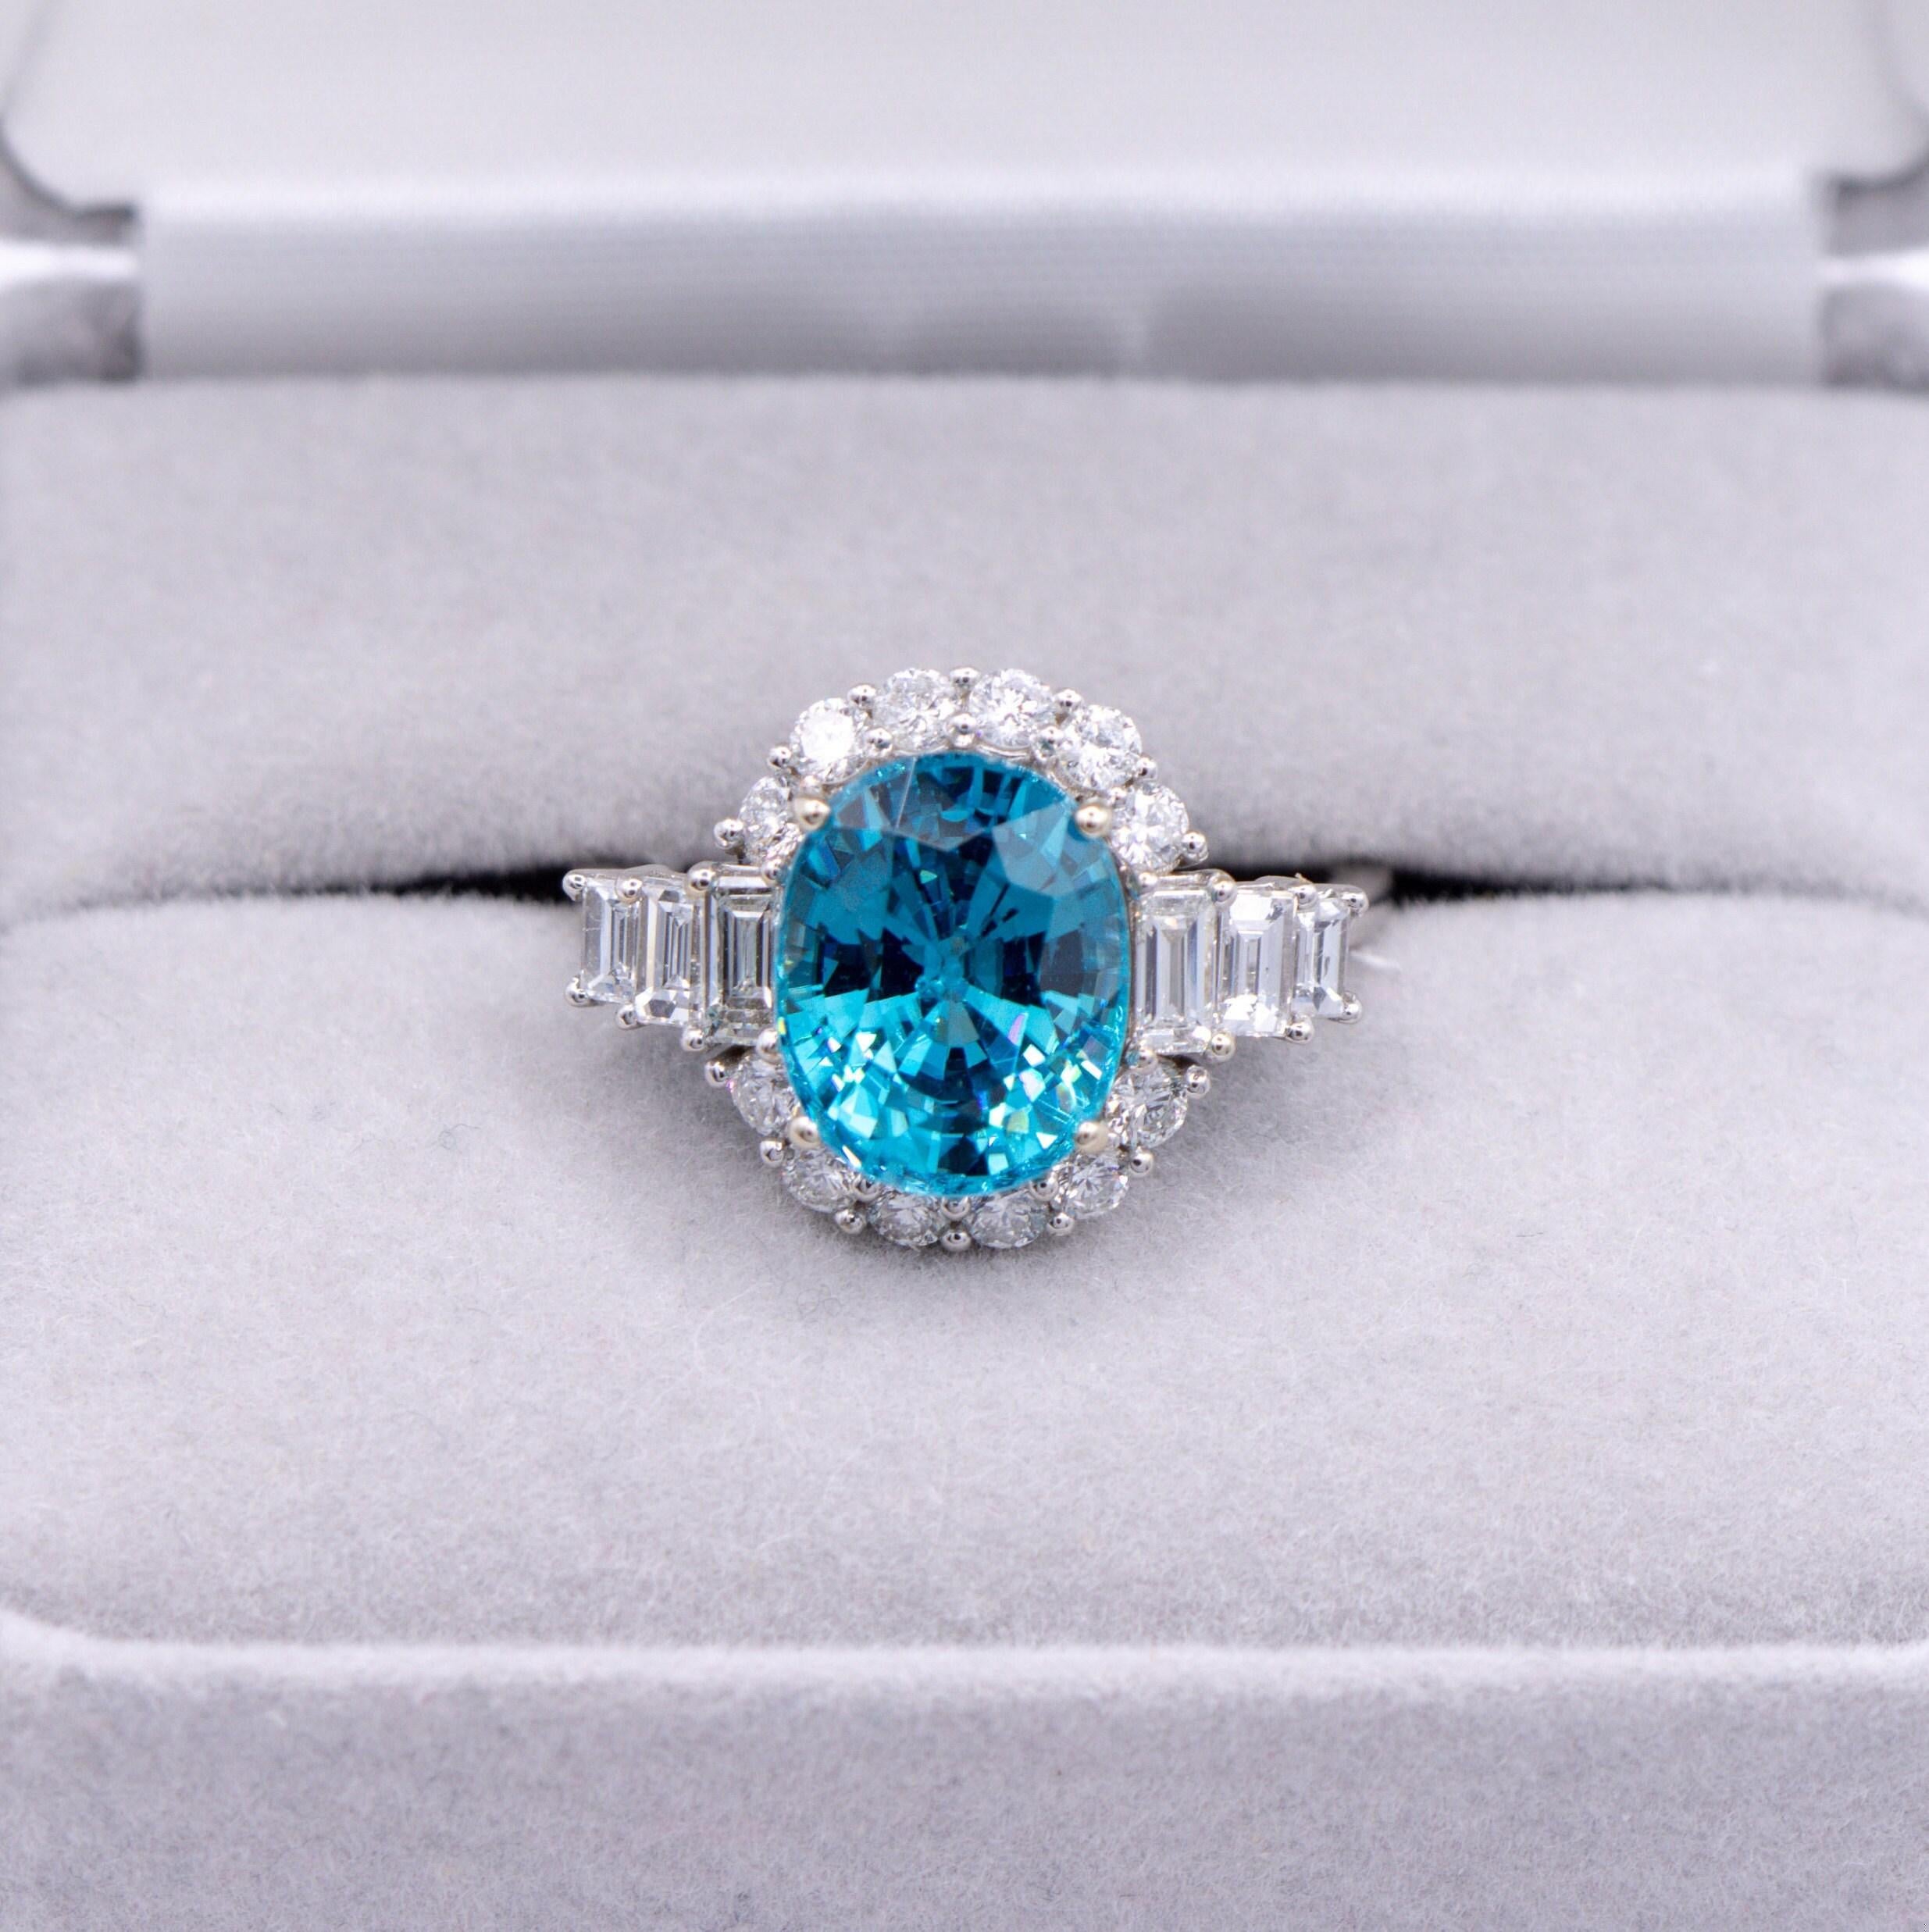 6ct Blue Zircon Ring w Earth Mined Diamonds in Solid 14k White Gold Oval 10.5x8